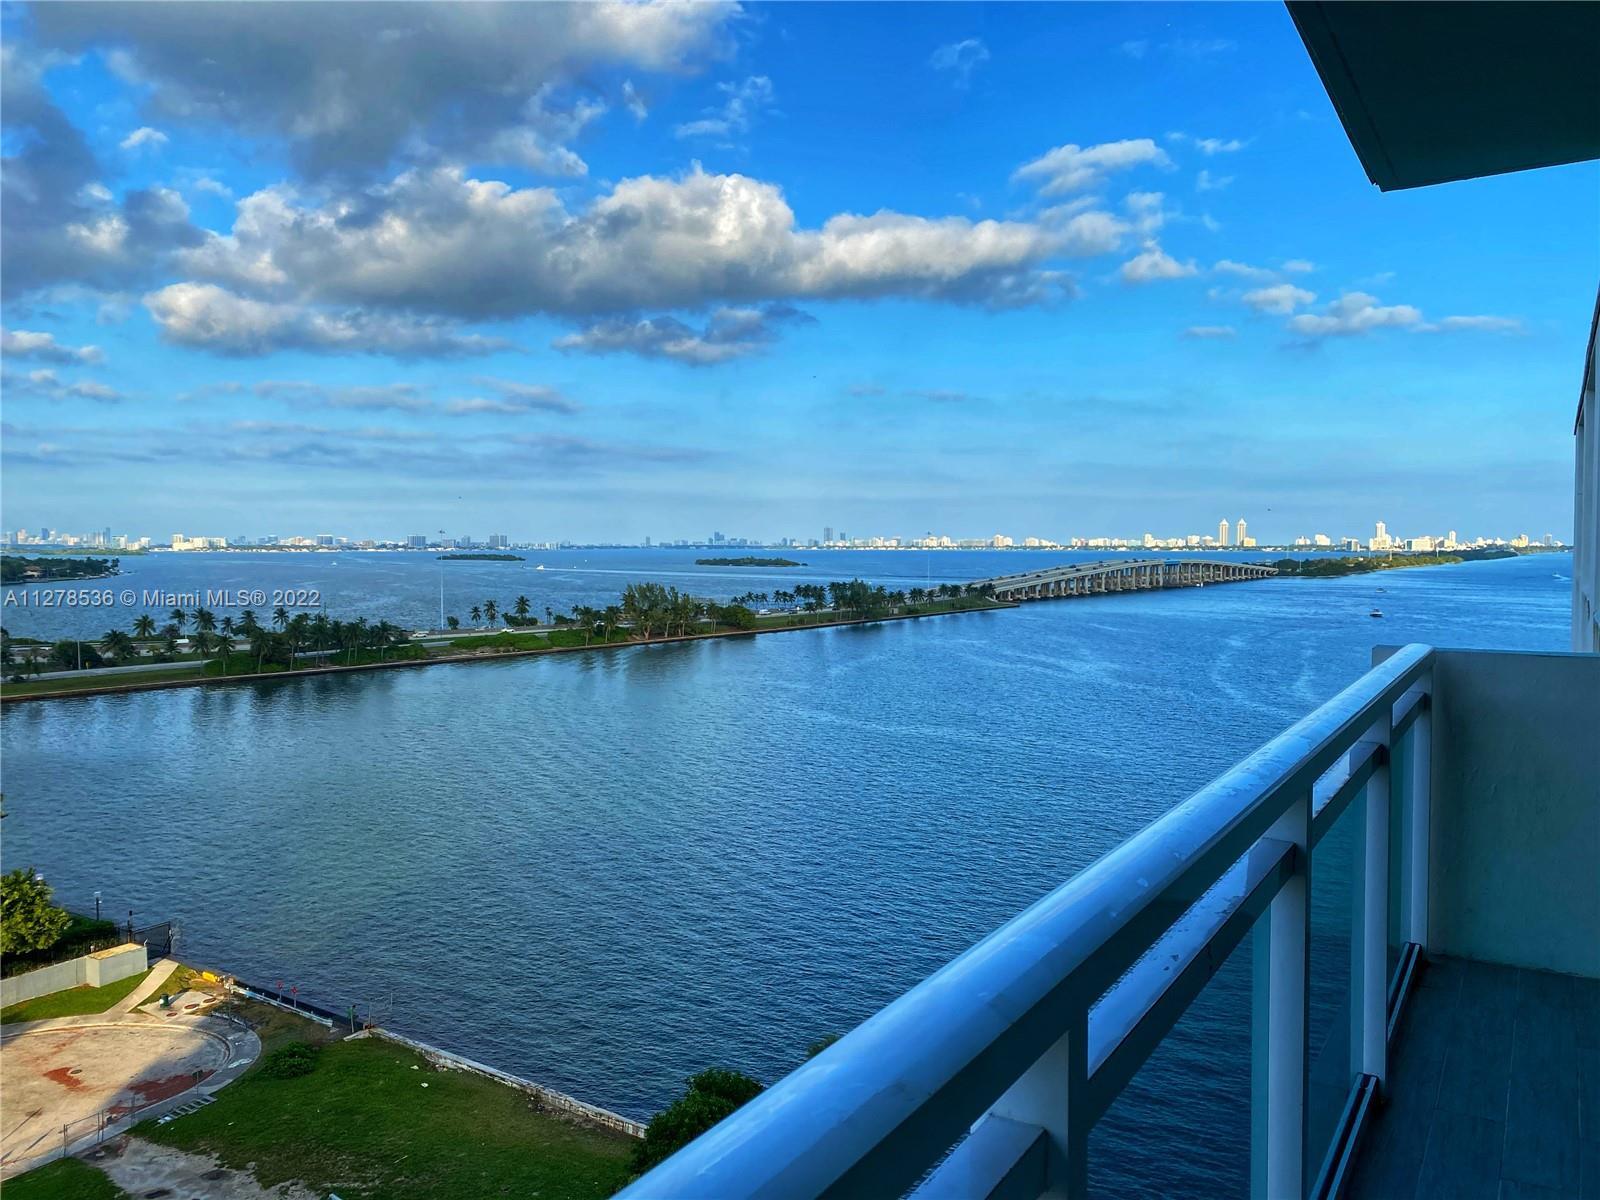 COMPLETELY REMODELED WATERFRONT STUDIO ON BISCAYNE BAY IN THE HEART OF EDGEWATER NEIGHBORHOOD IN MIA